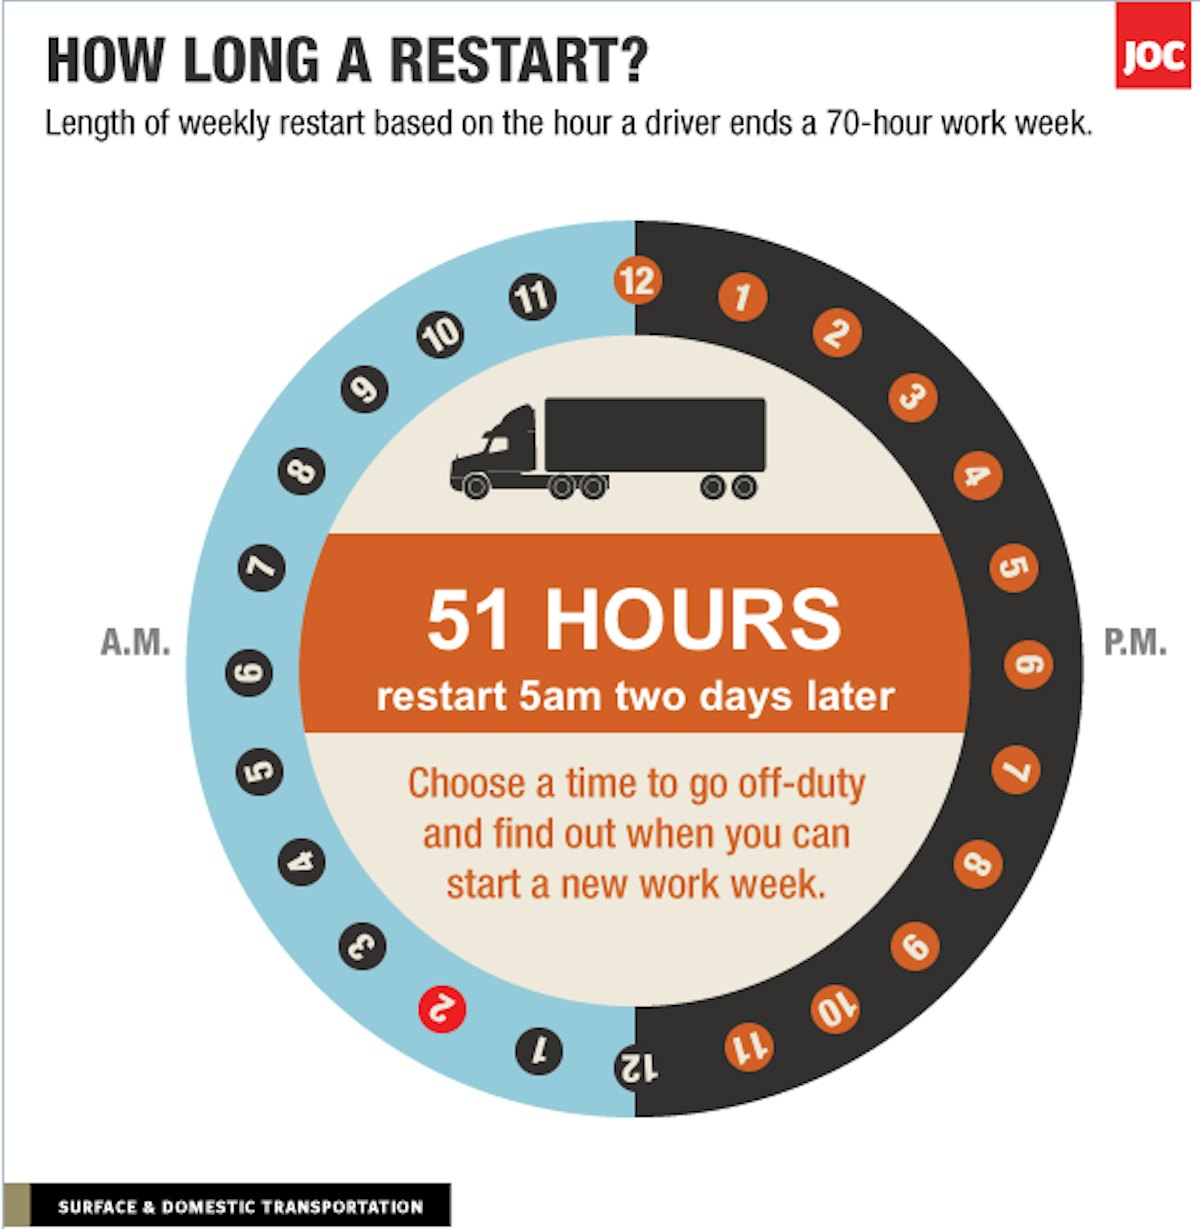 How long does a 34-hour restart really take?